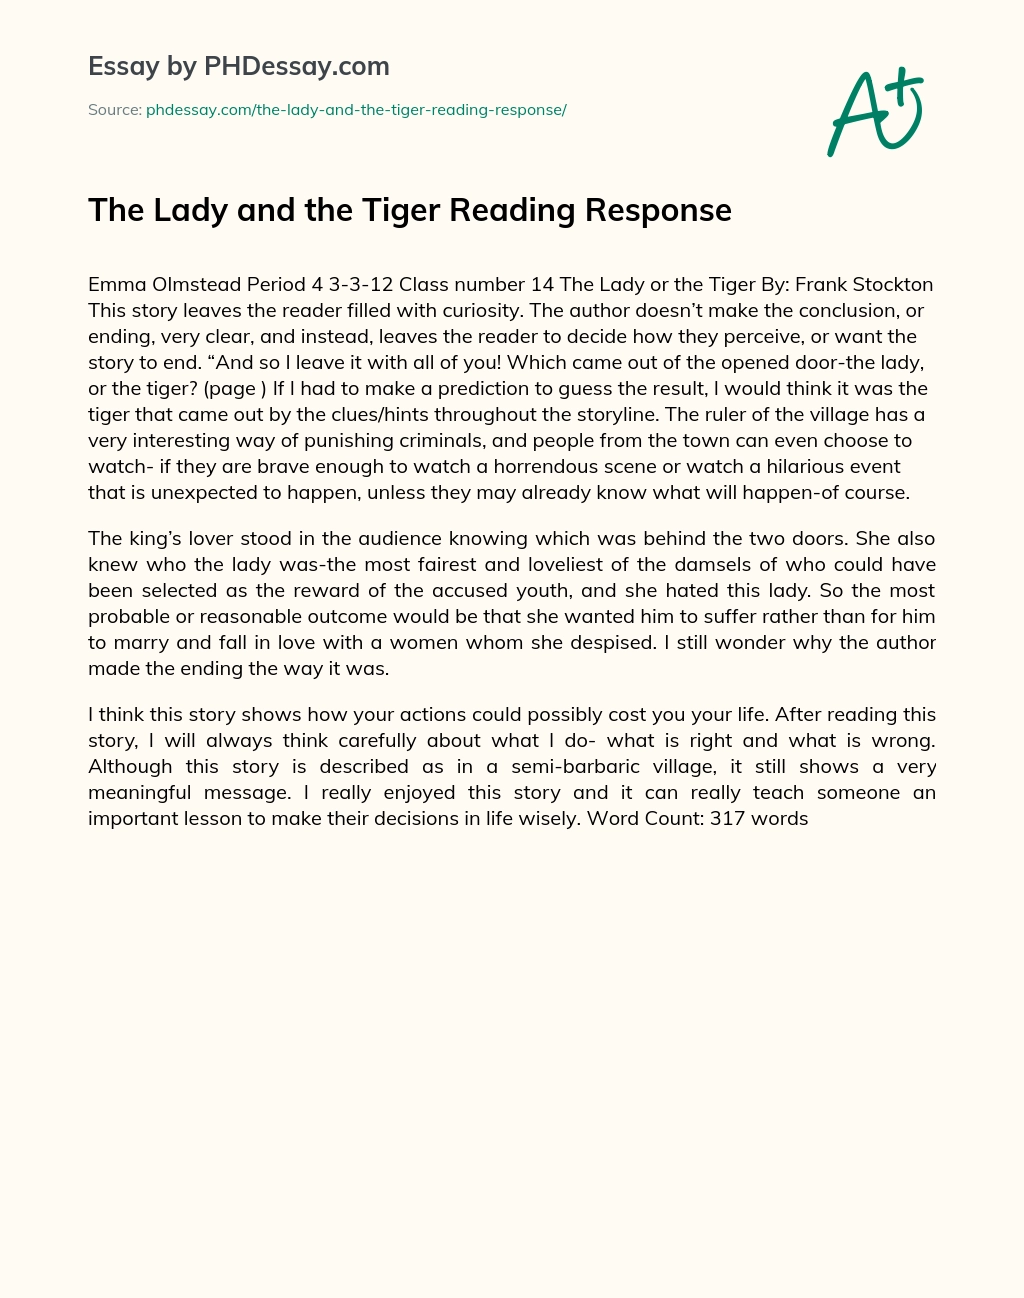 The Lady and the Tiger Reading Response essay